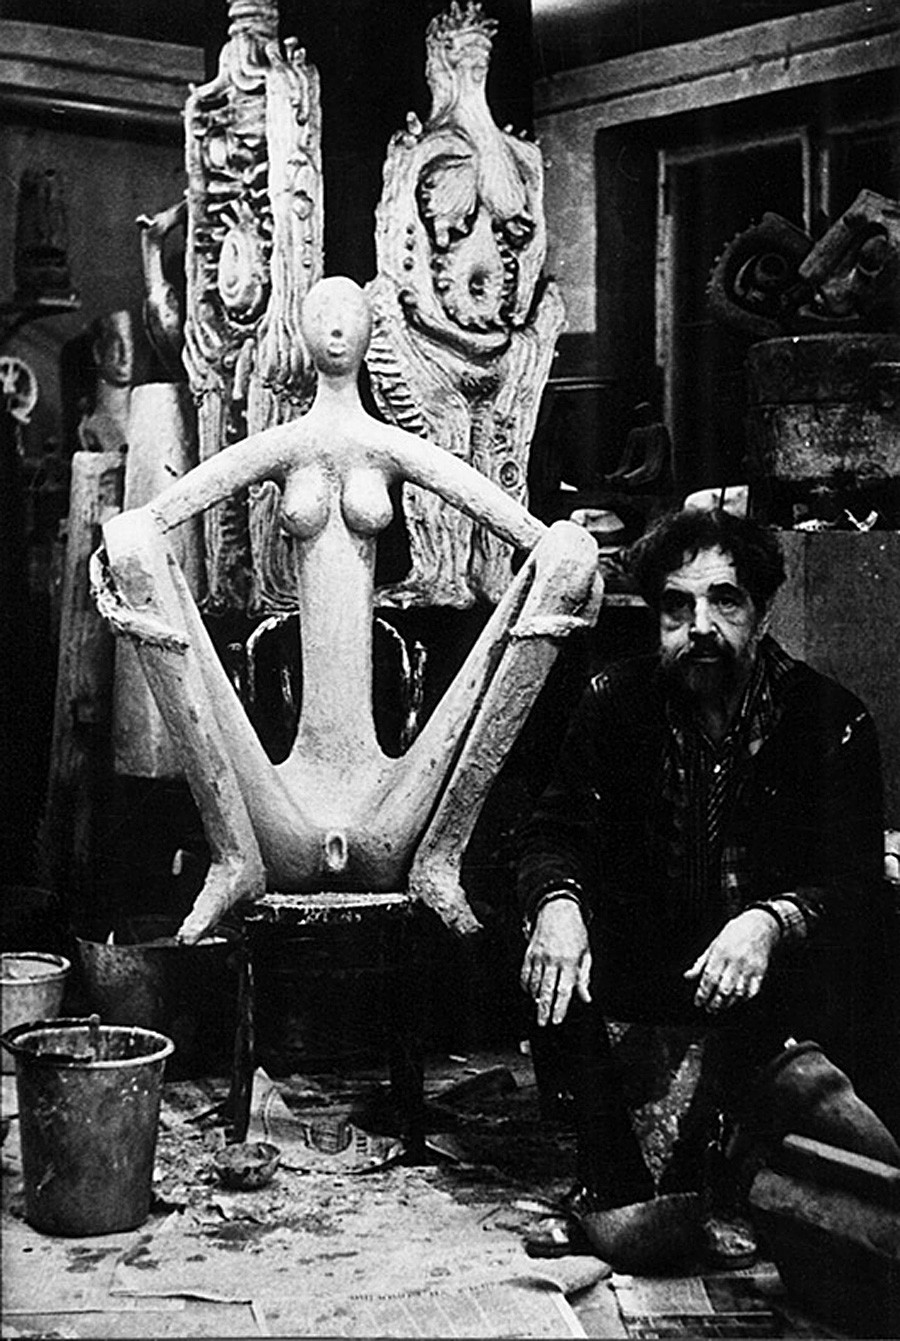 Sidur in his studio and “Venus on a Viennese Chair”